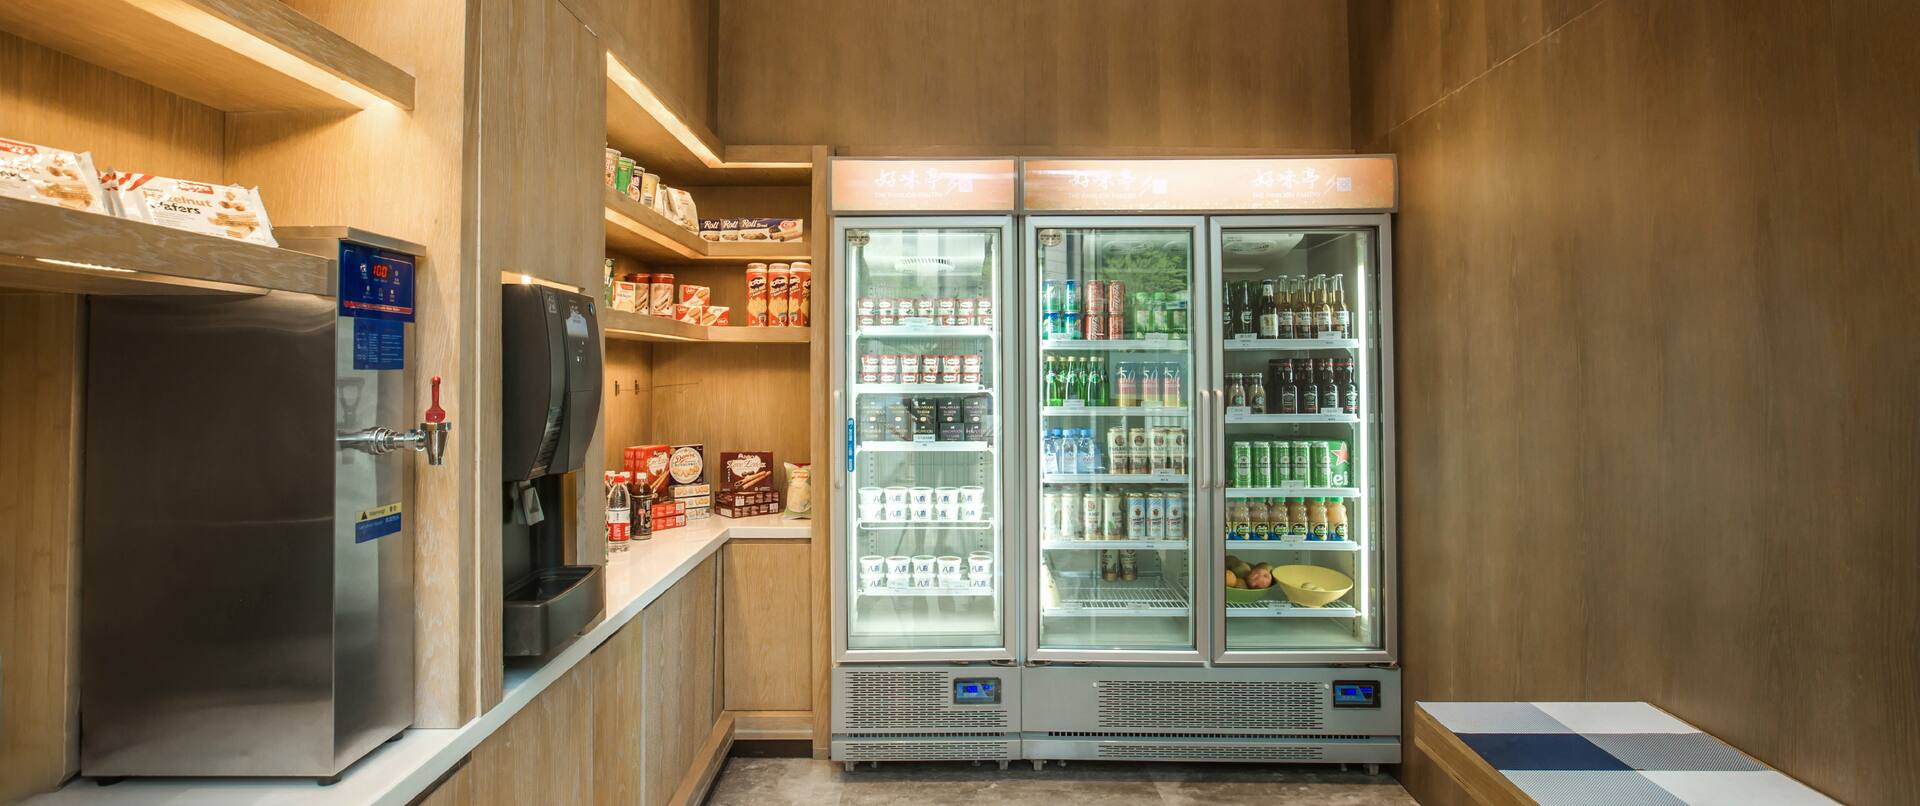 Pavilion Pantry with Snacks and Beverages